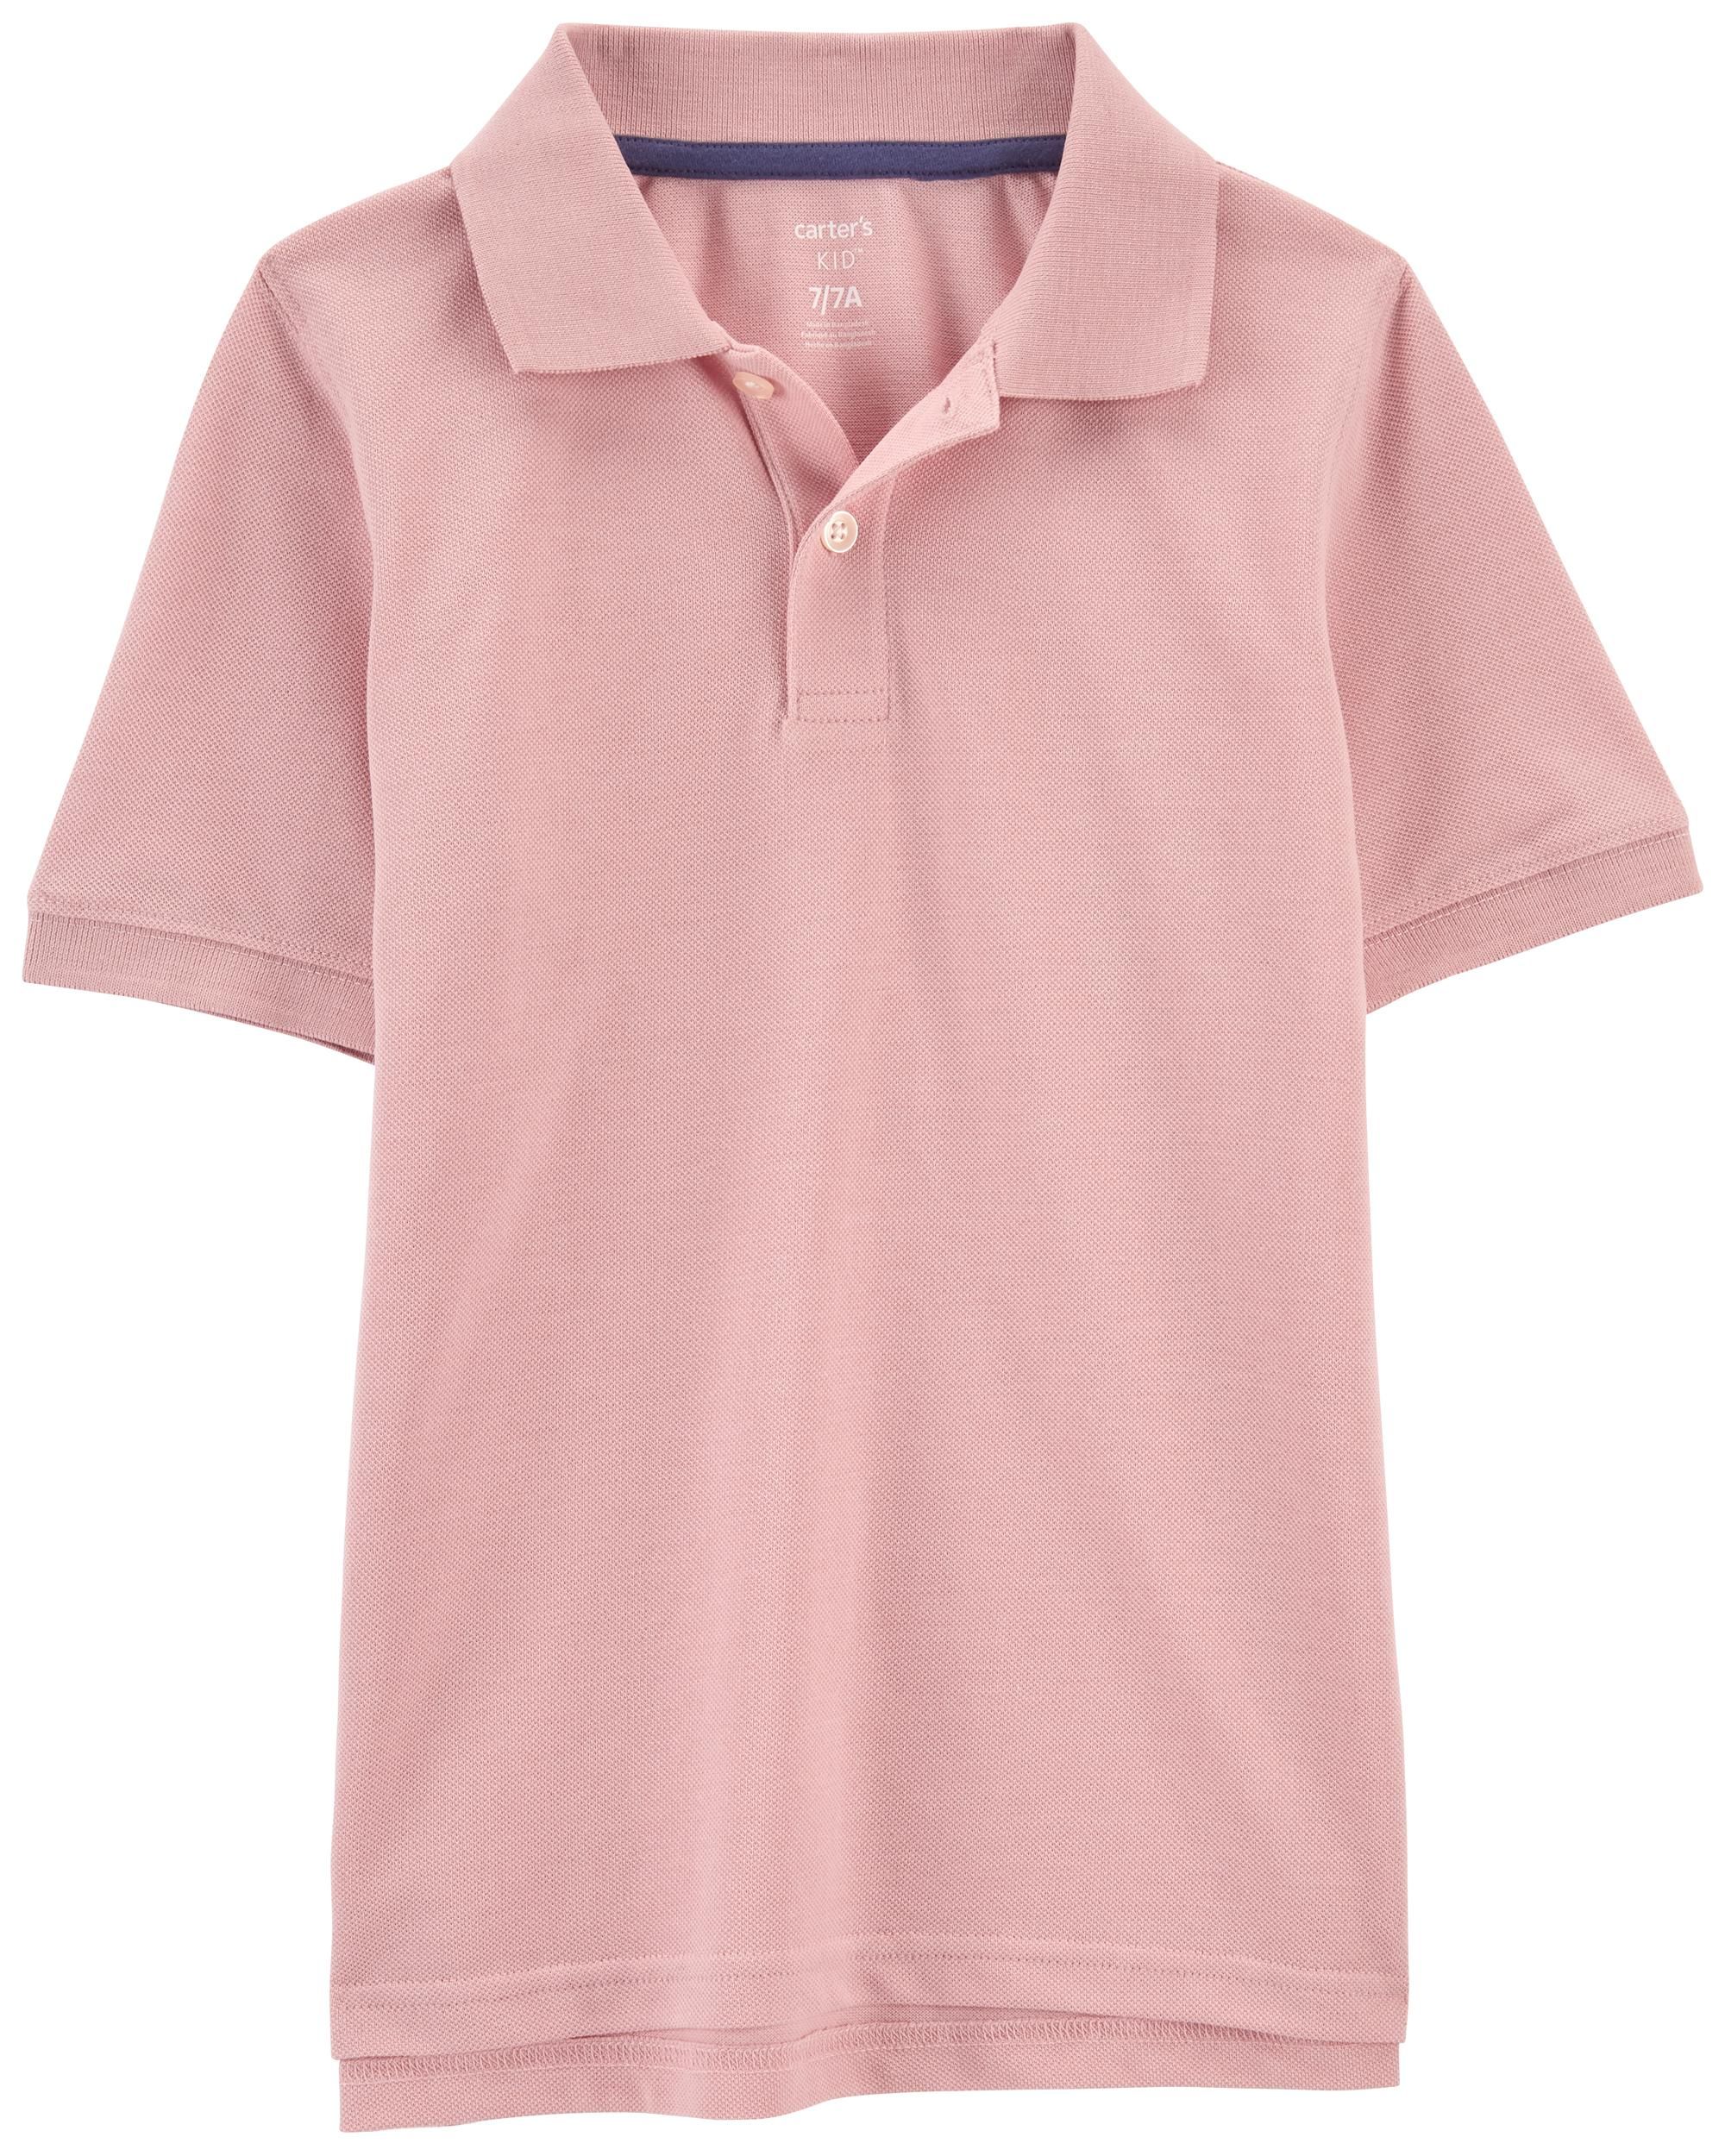 Kid Jersey Polo | Carter's